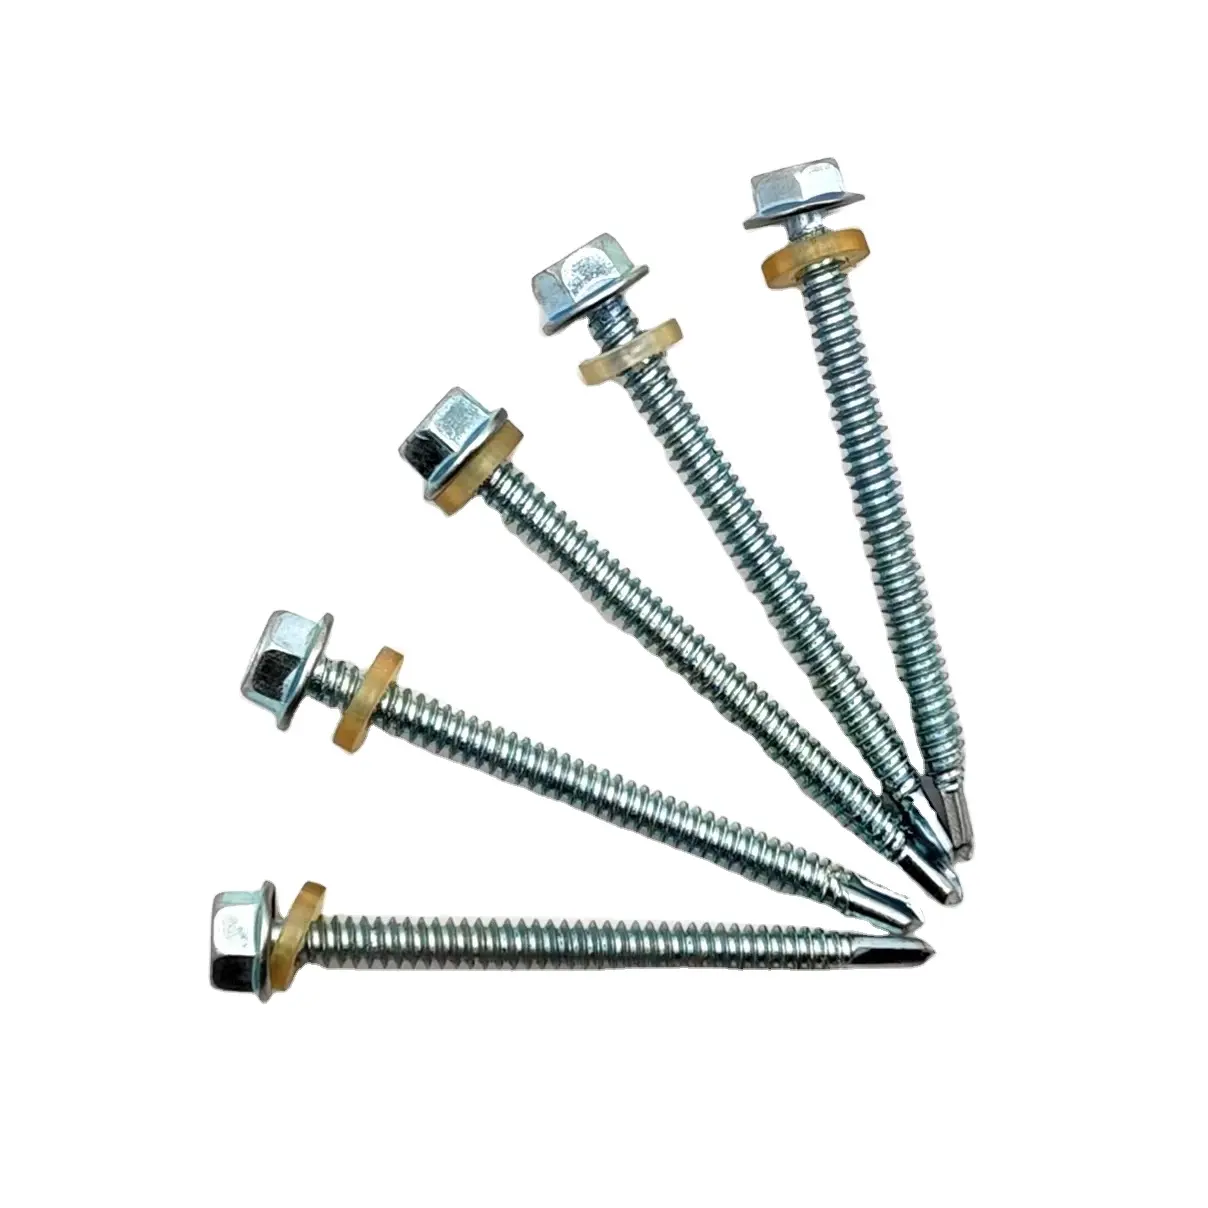 China factory hexagonal arandela cabeza Phillips Drive high quality self drilling screws hex head with EPDM / PVC washer